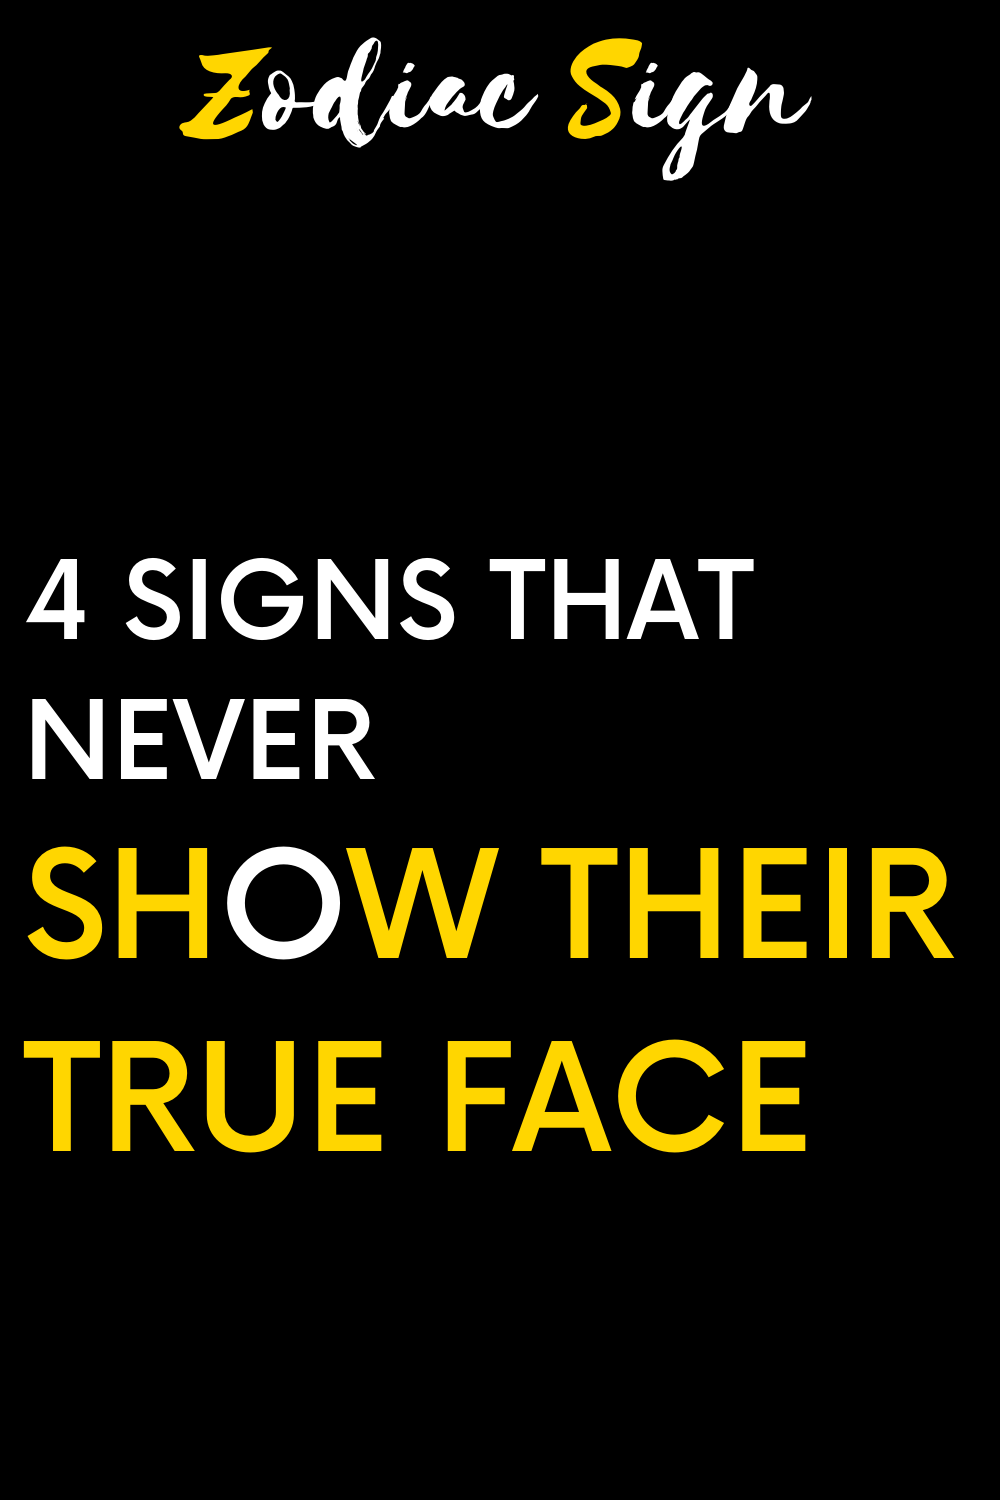 4 signs that never show their true face